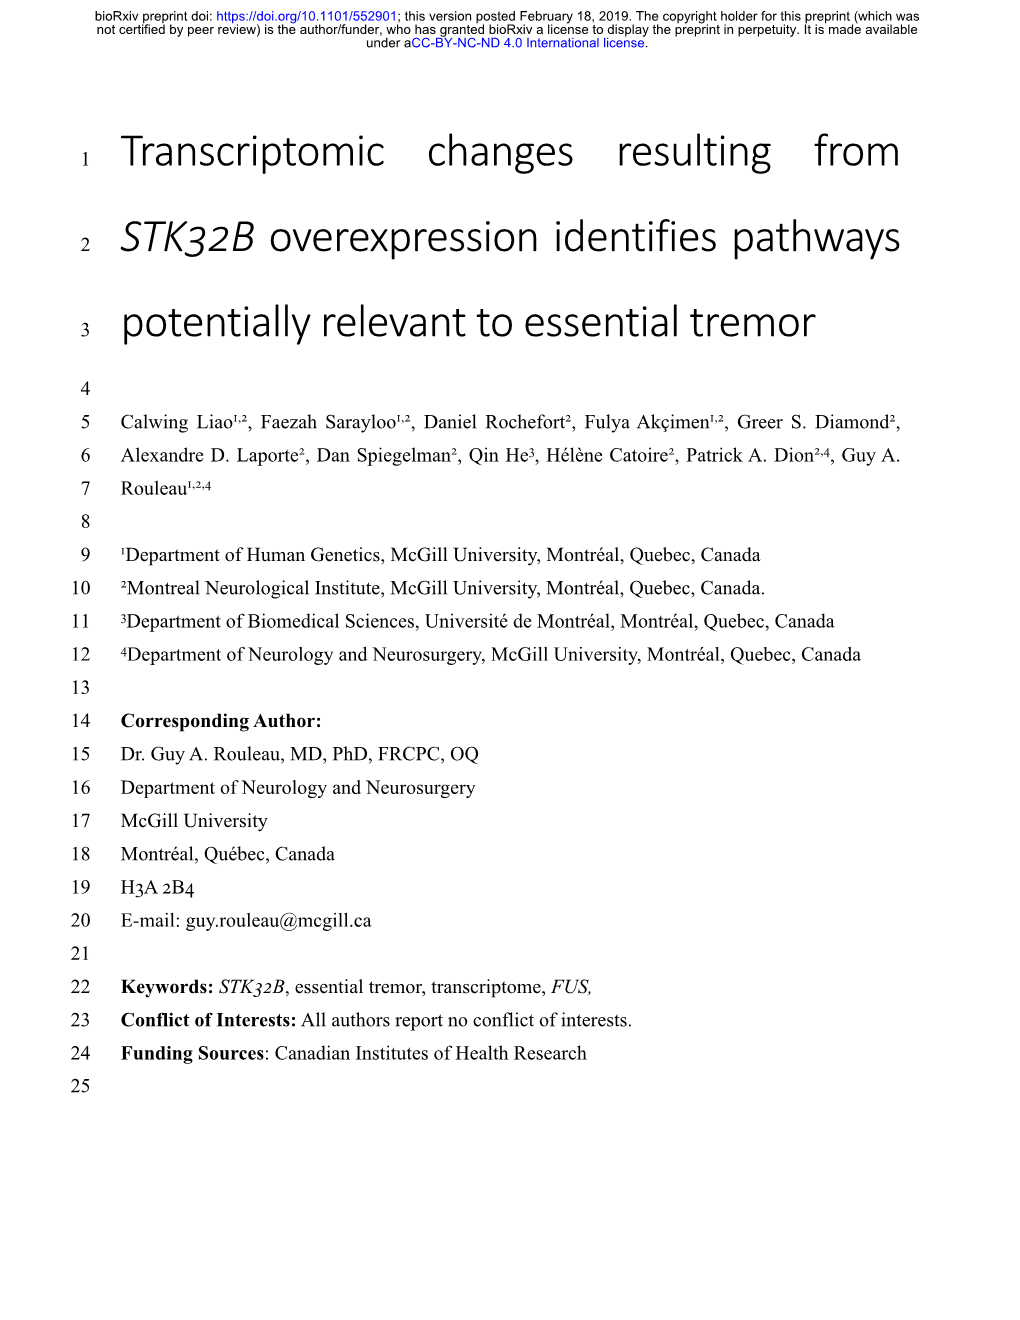 Transcriptomic Changes Resulting from STK32B Overexpression Identifies Pathways Potentially Relevant to Essential Tremor